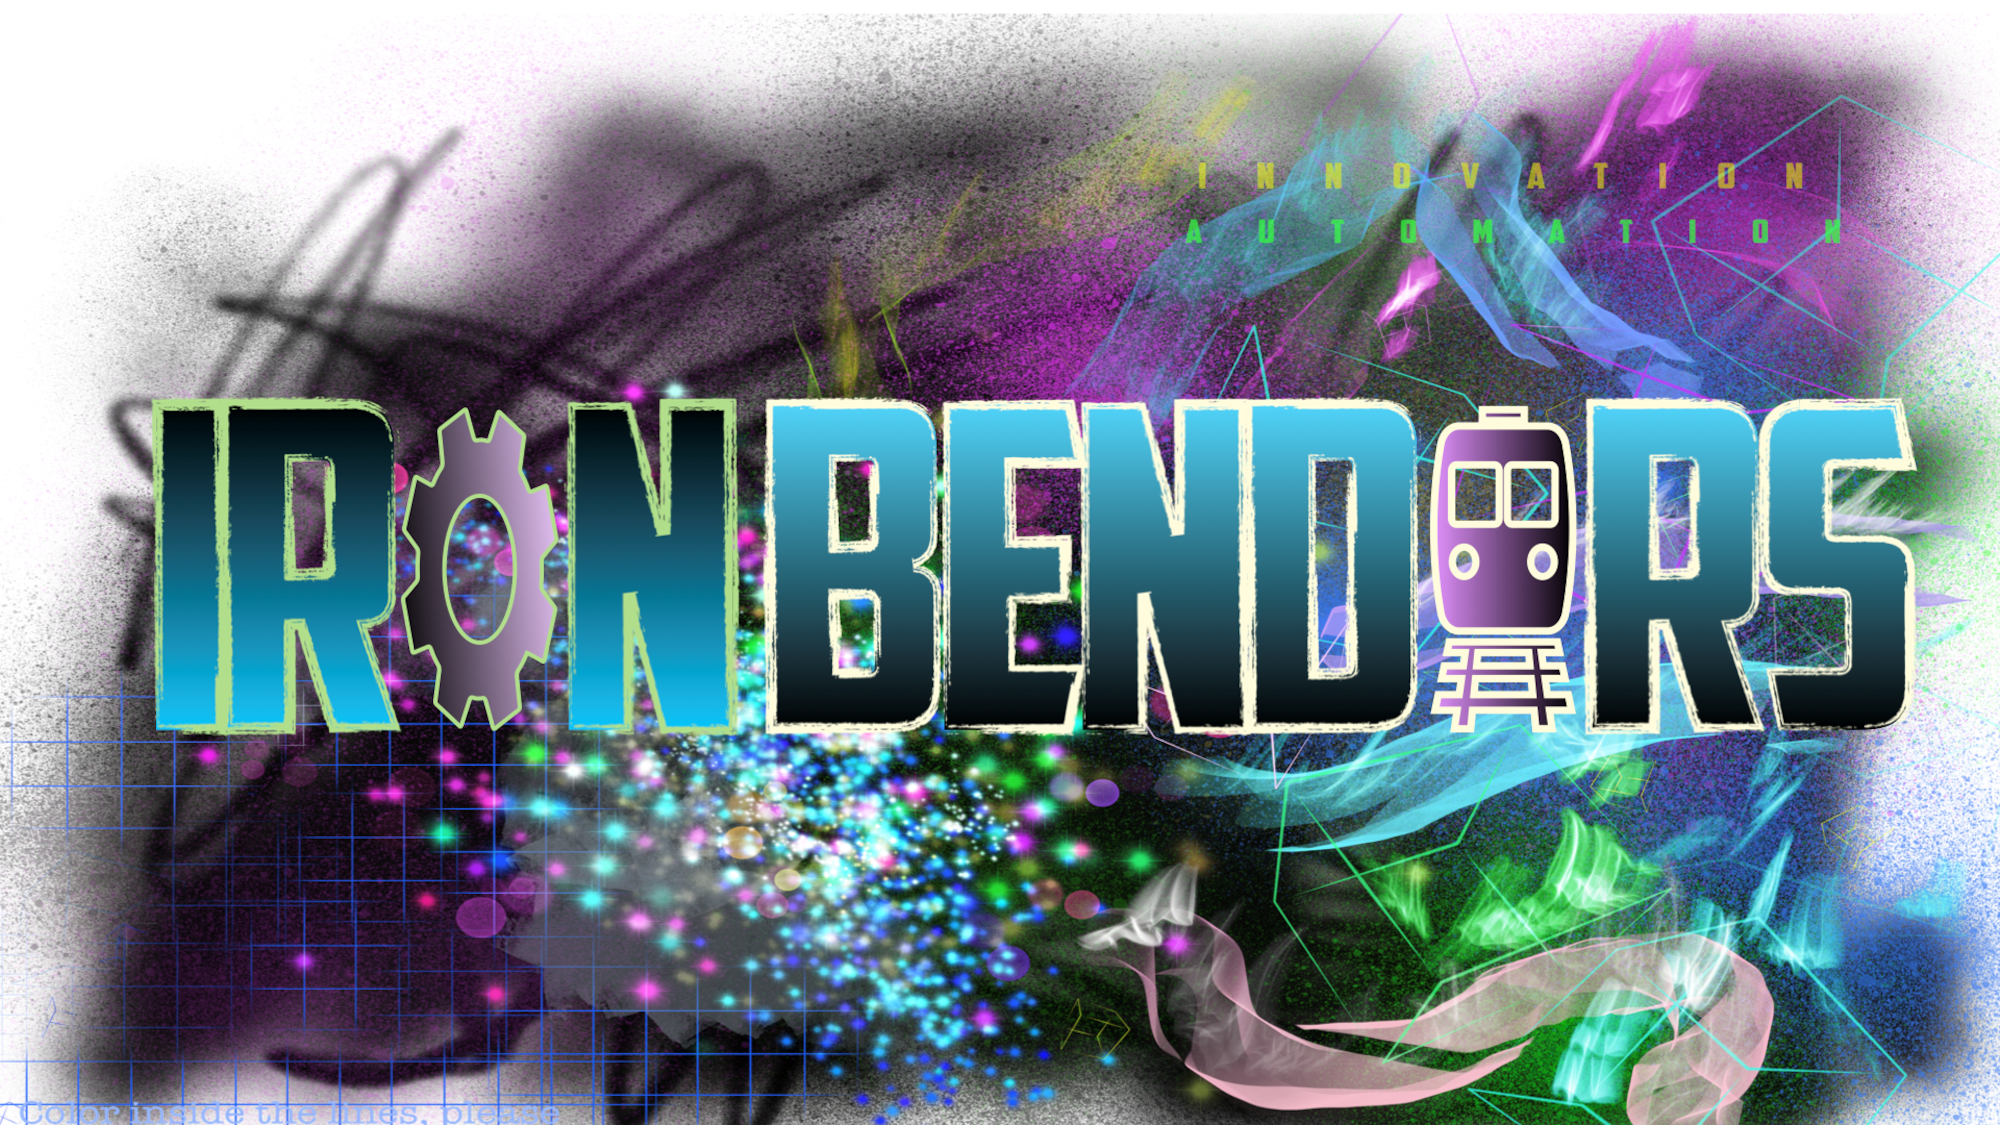 A colorful graphic featuring the text "Ironbenders".